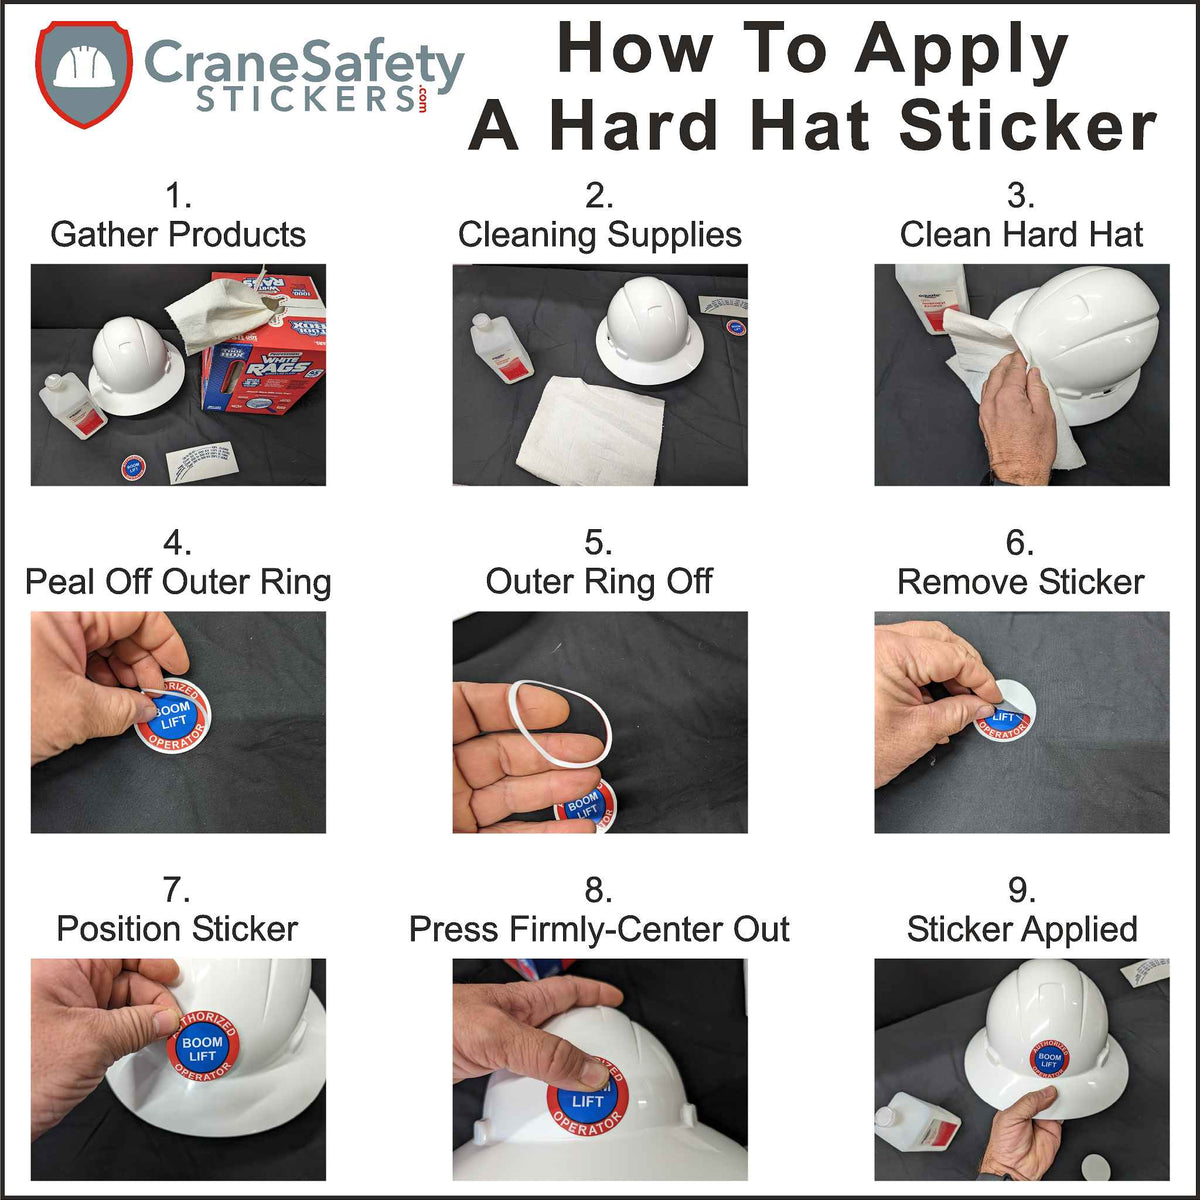 How to apply our sticker on a hard hat.